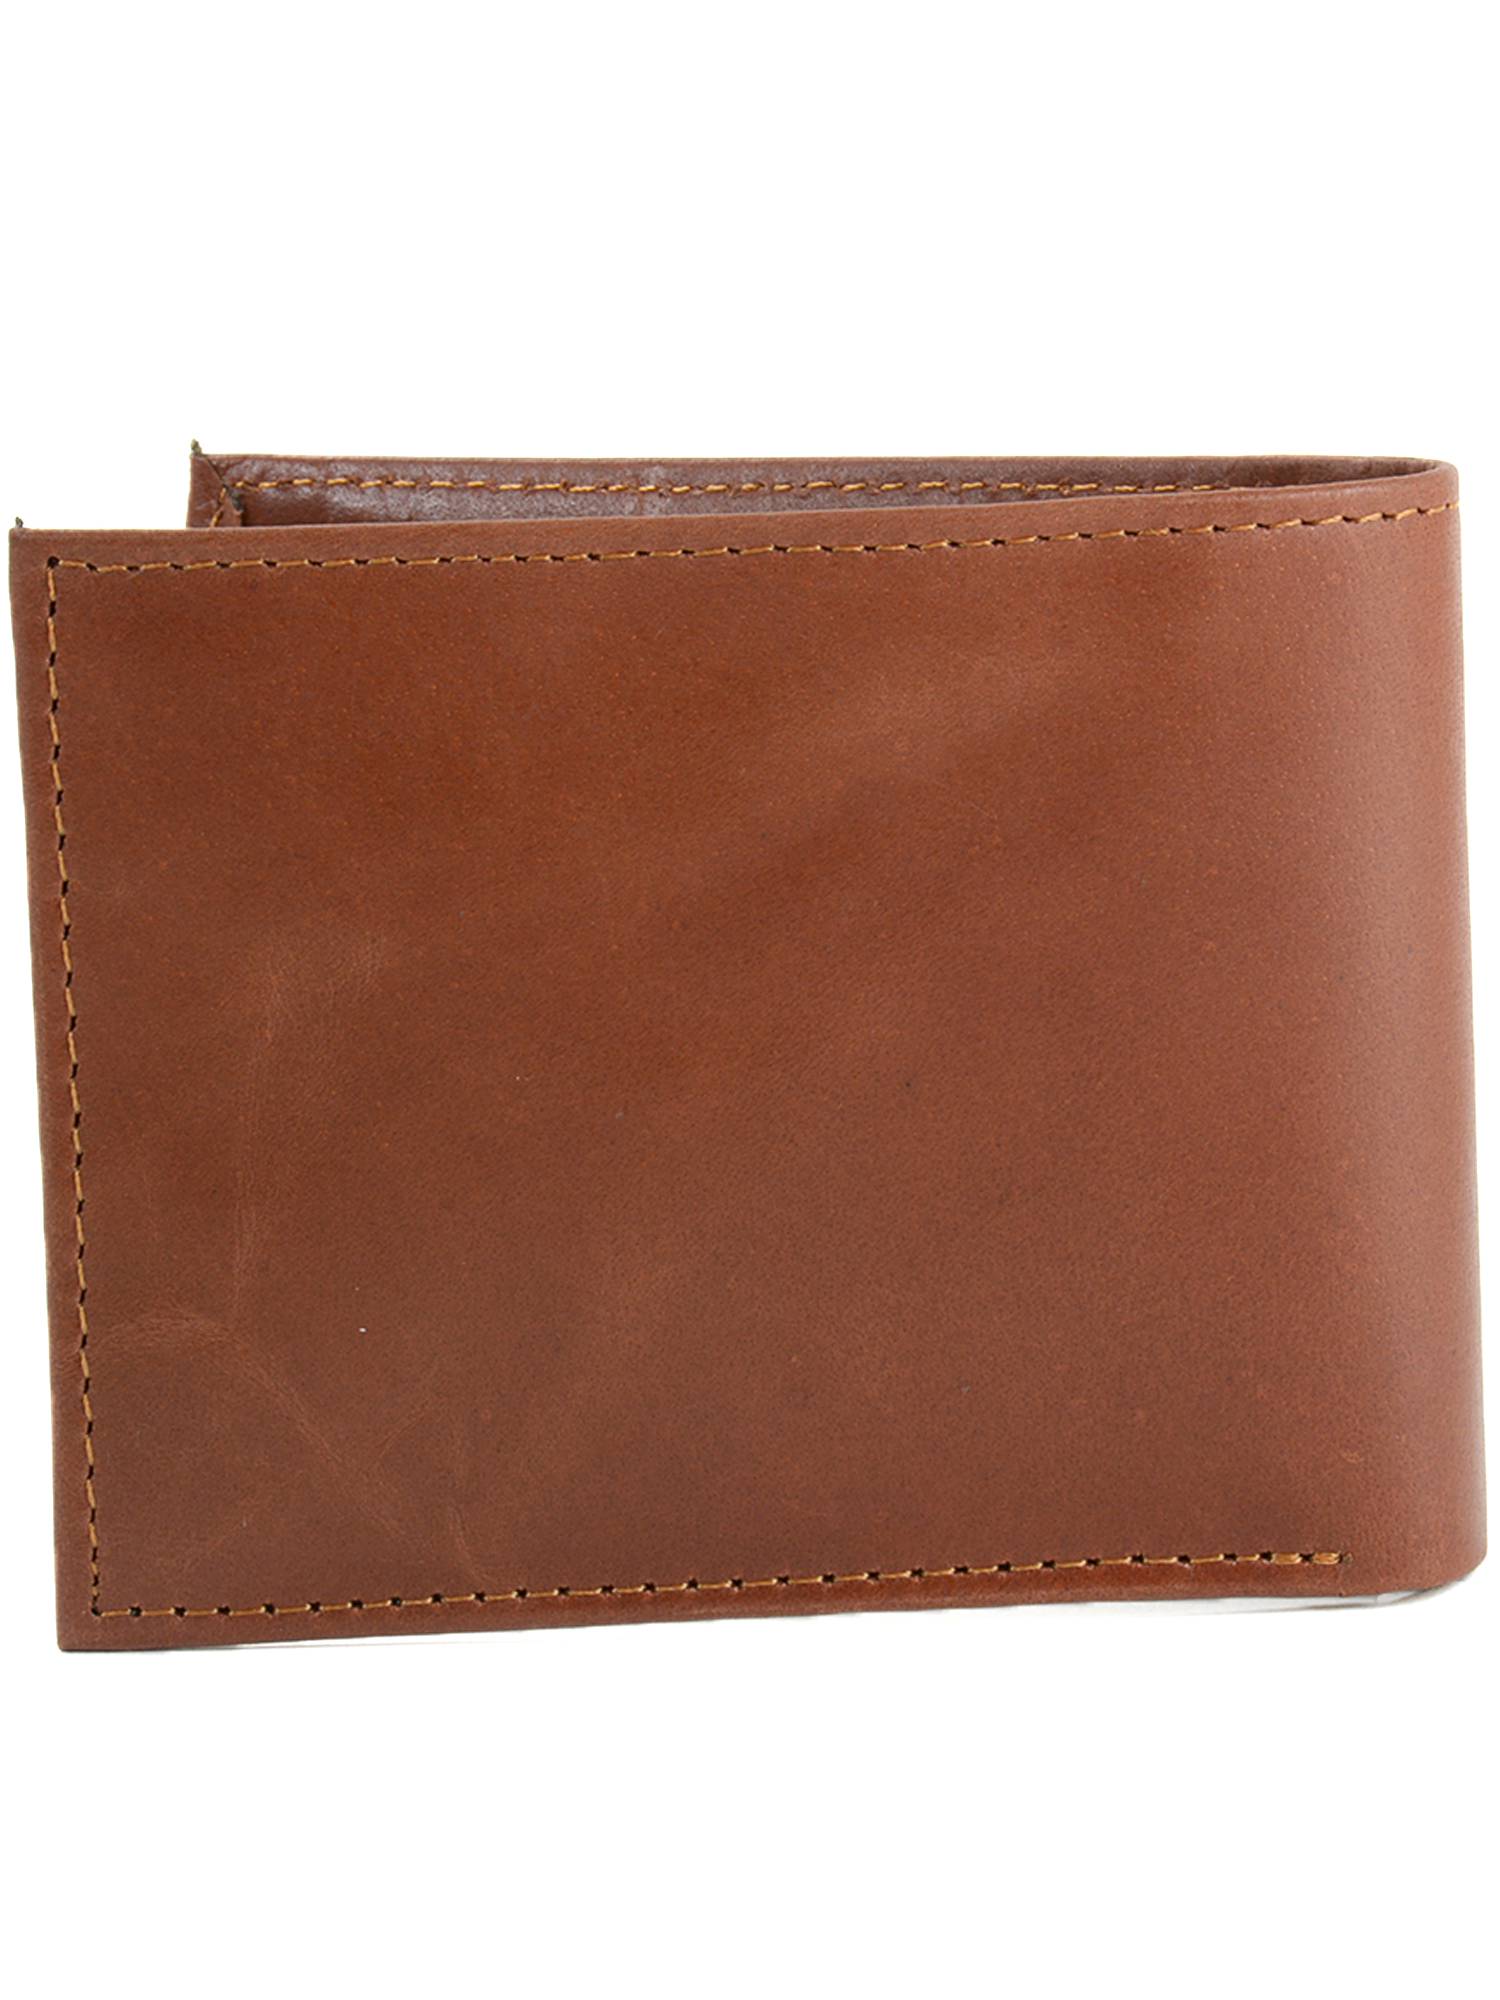 Alpine Swiss Mens Leather RFID Bifold Wallet 2 ID Windows Divided Bill Section - image 4 of 7